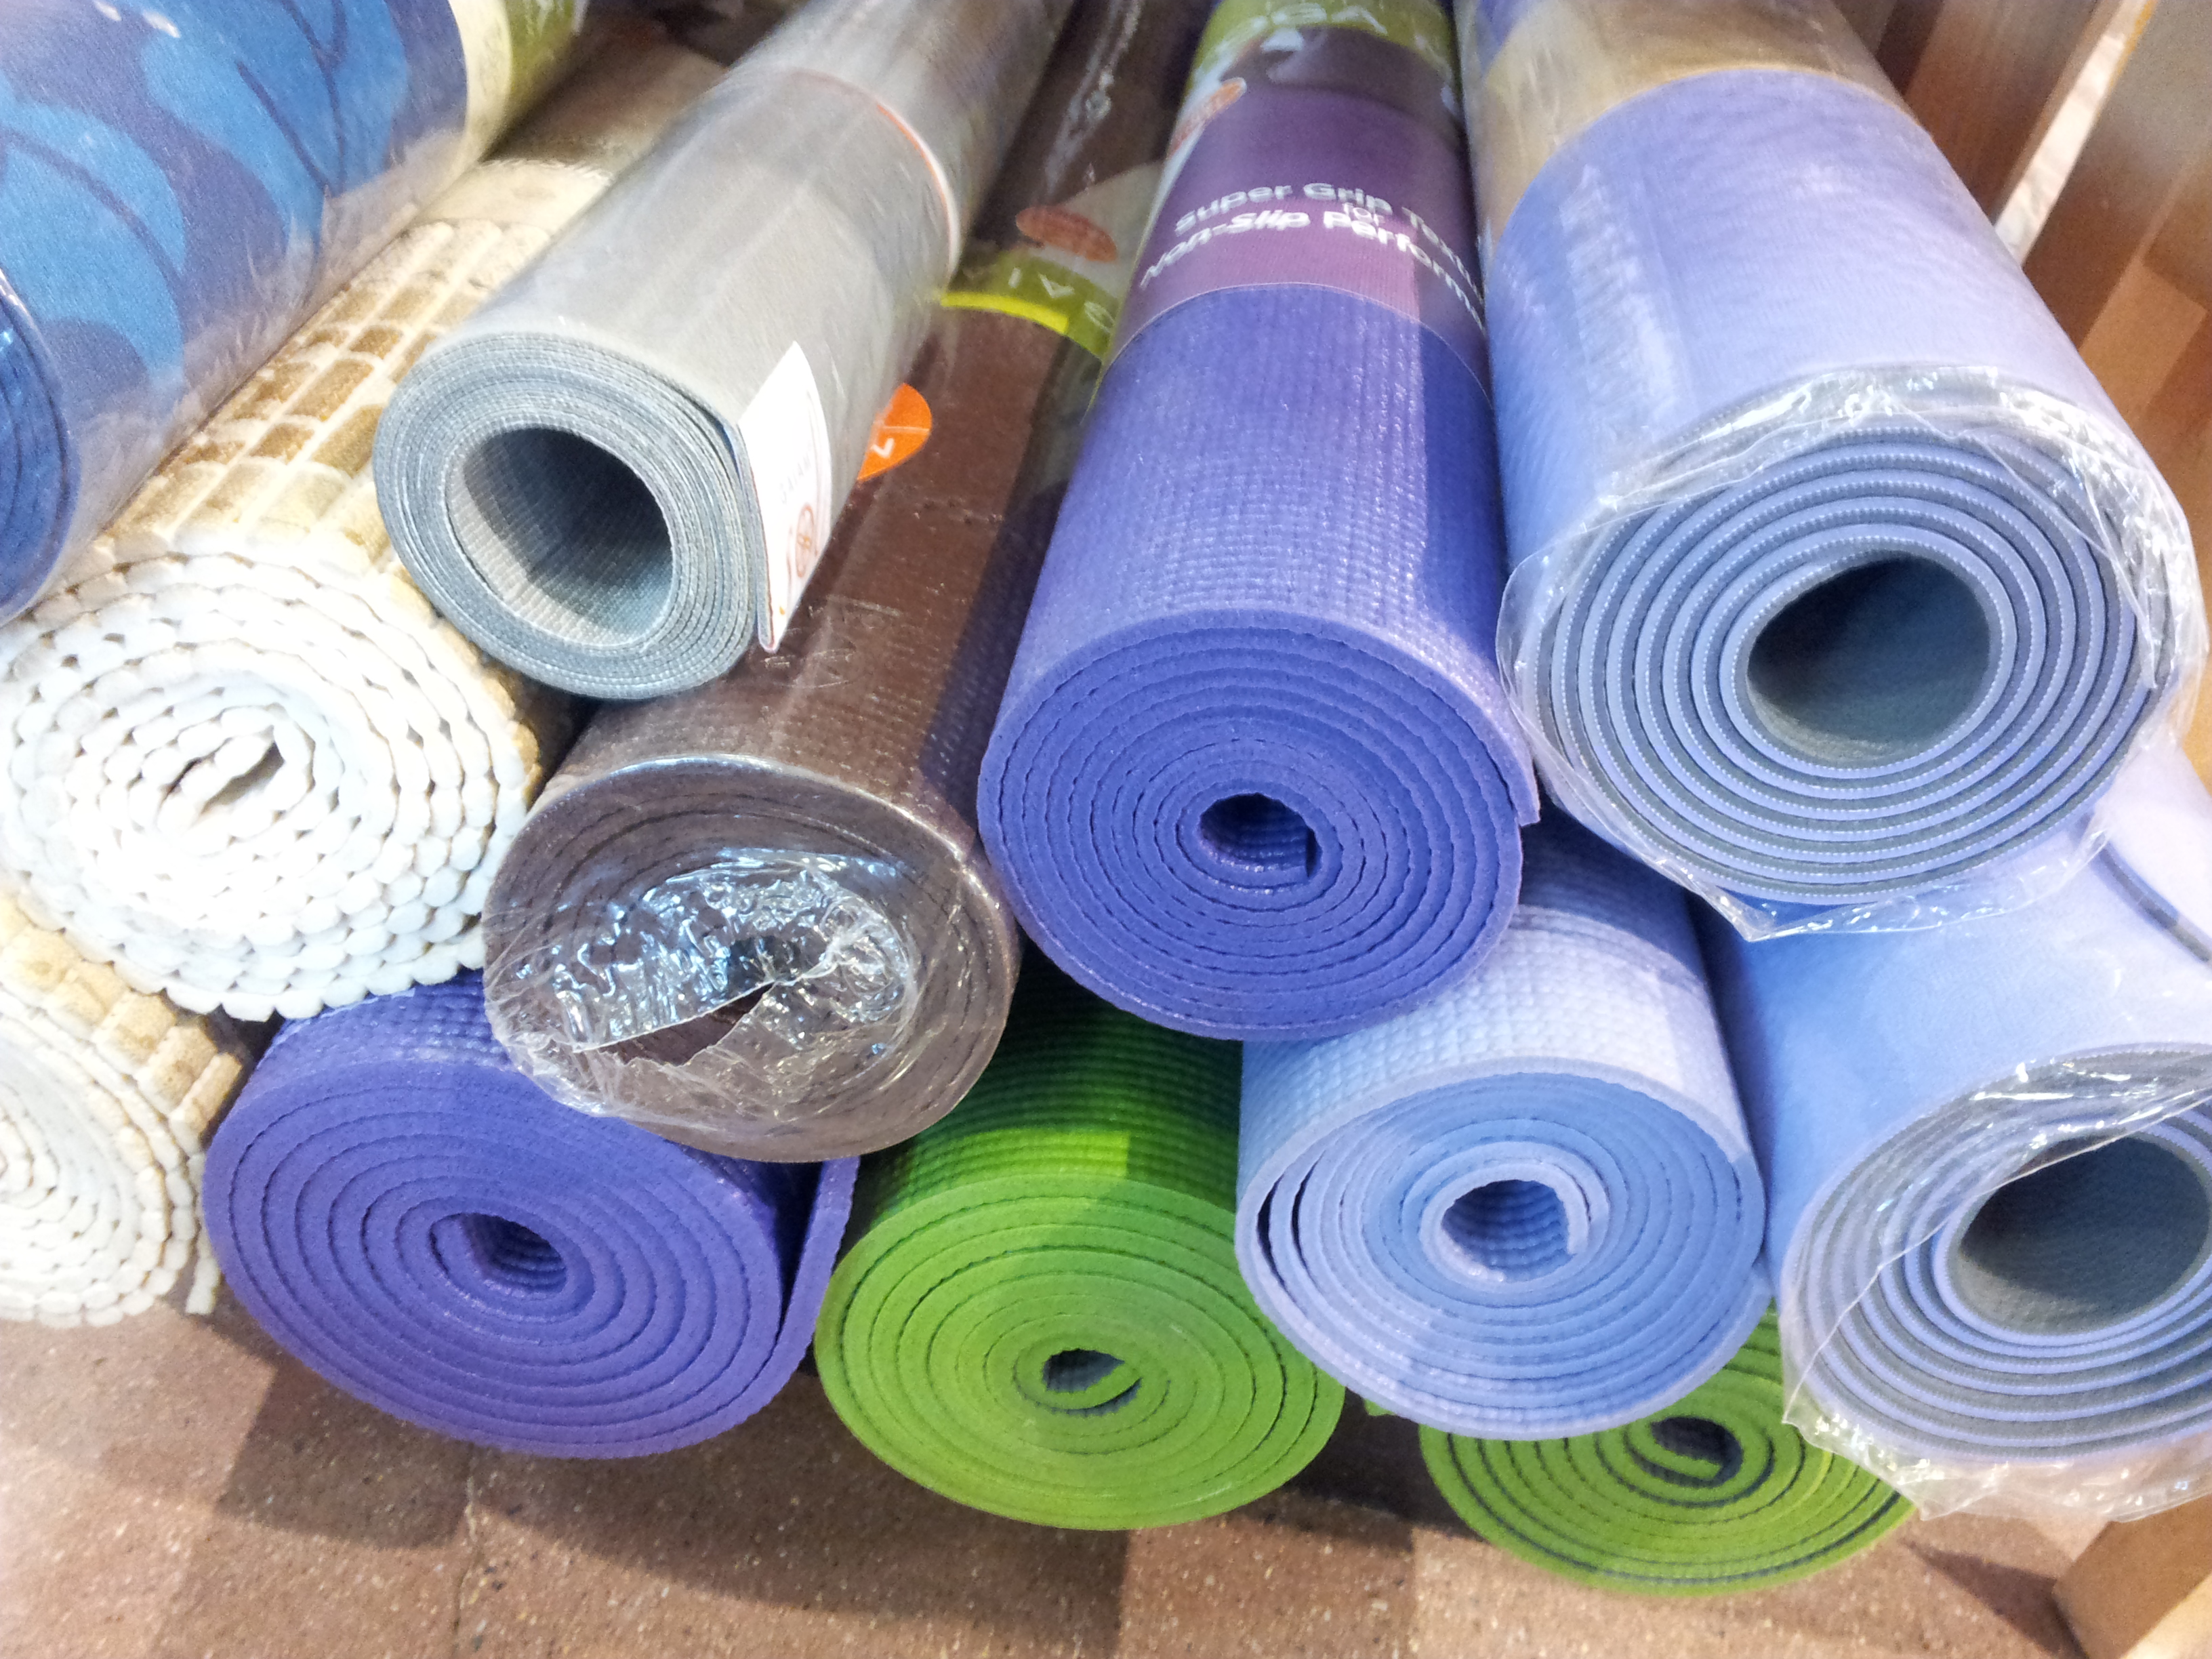 thin or thick yoga mat